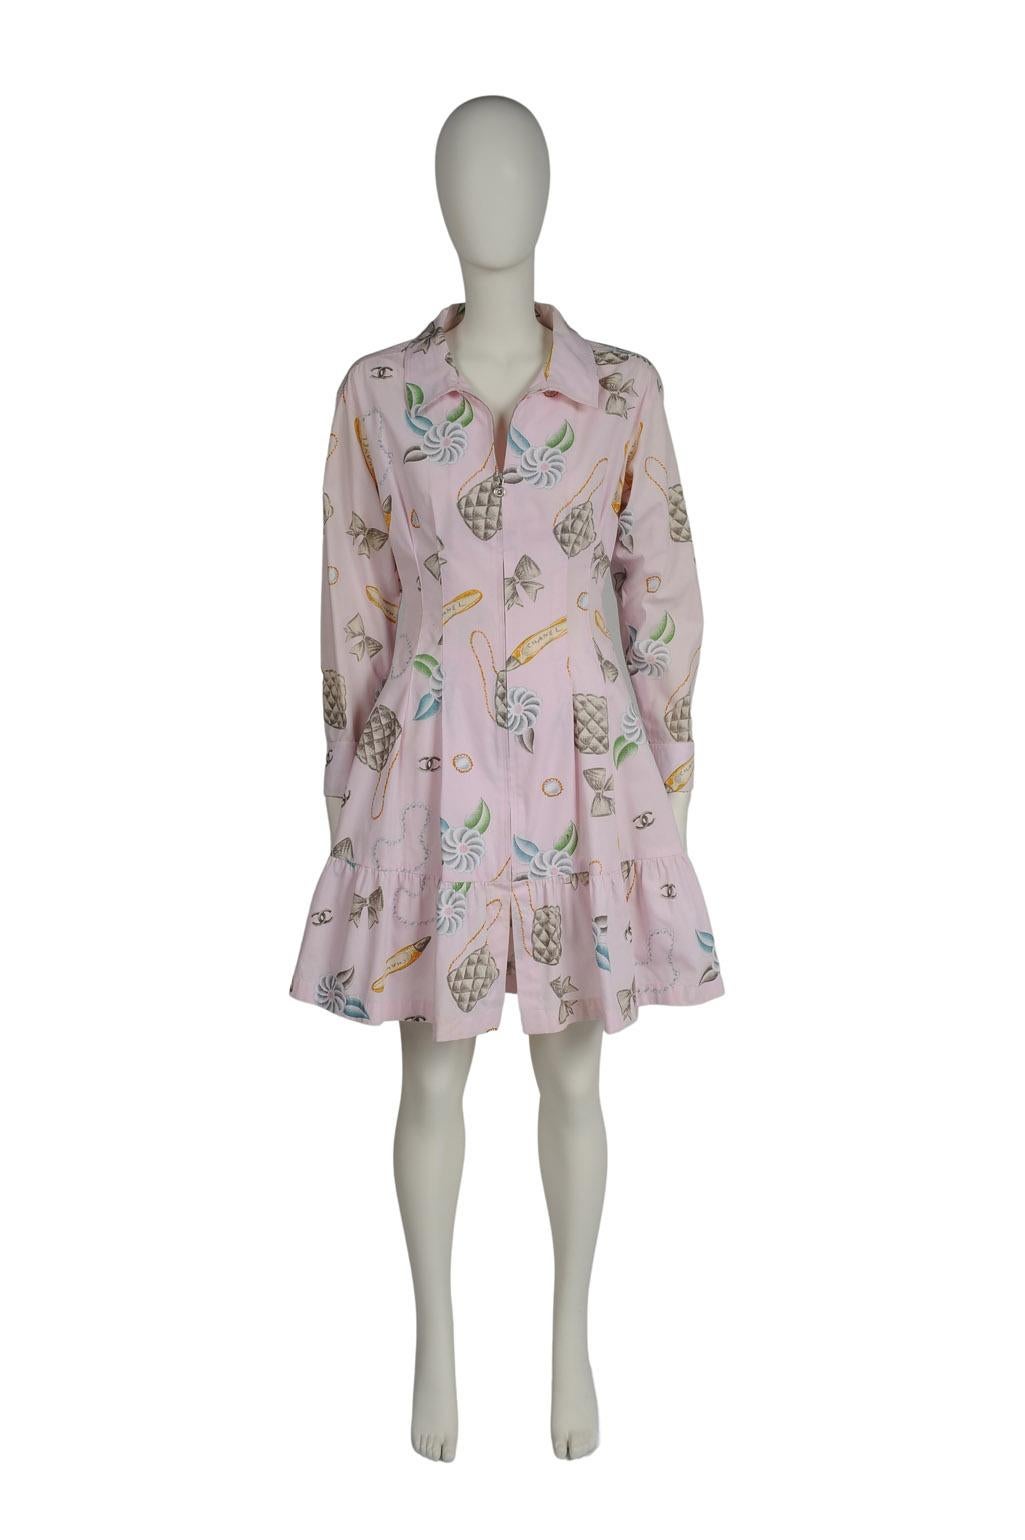 Chanel's SS1996 collection consisted of over 190 looks and most of them became iconic and highly sought after. Made from lightweight, breathable light pink printed cotton-poplin, this shirt-style dress is ideal for the mild spring weather. Cut for a